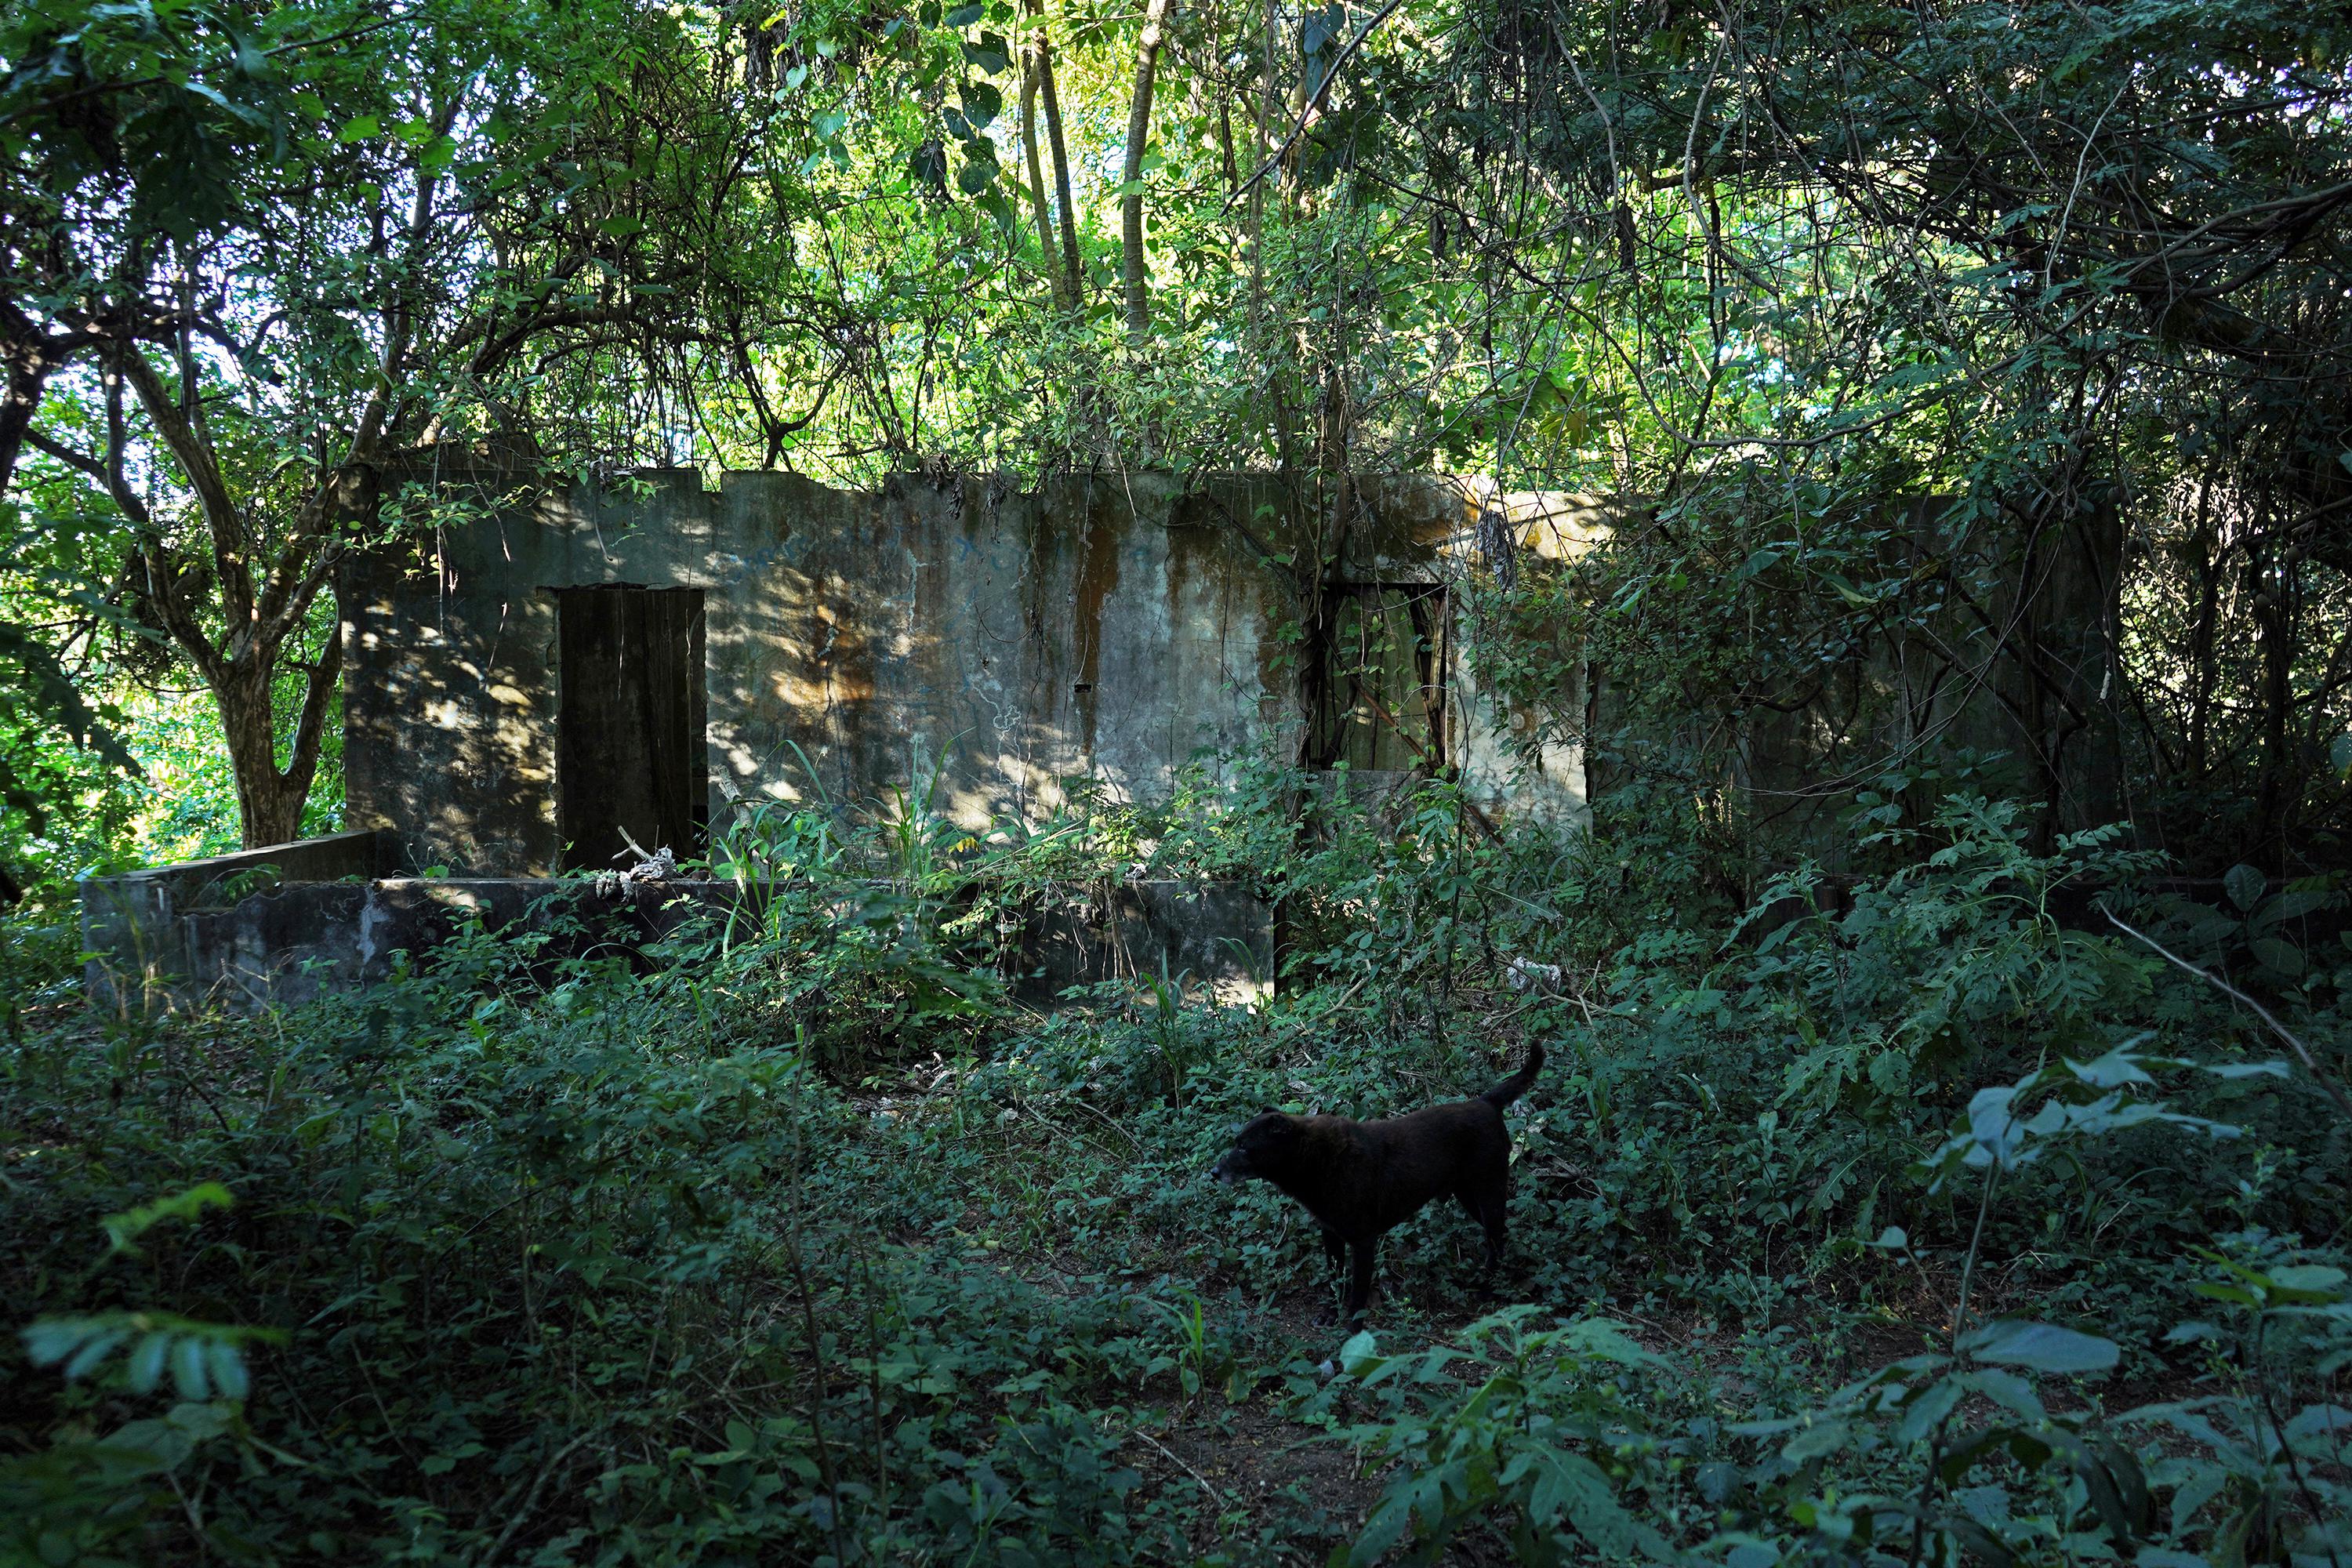 This abandoned and dilapidated house in Las Margaritas was used for many years by MS-13. Neighbors frequently heard gunshots coming from inside. Photo: Víctor Peña/El Faro